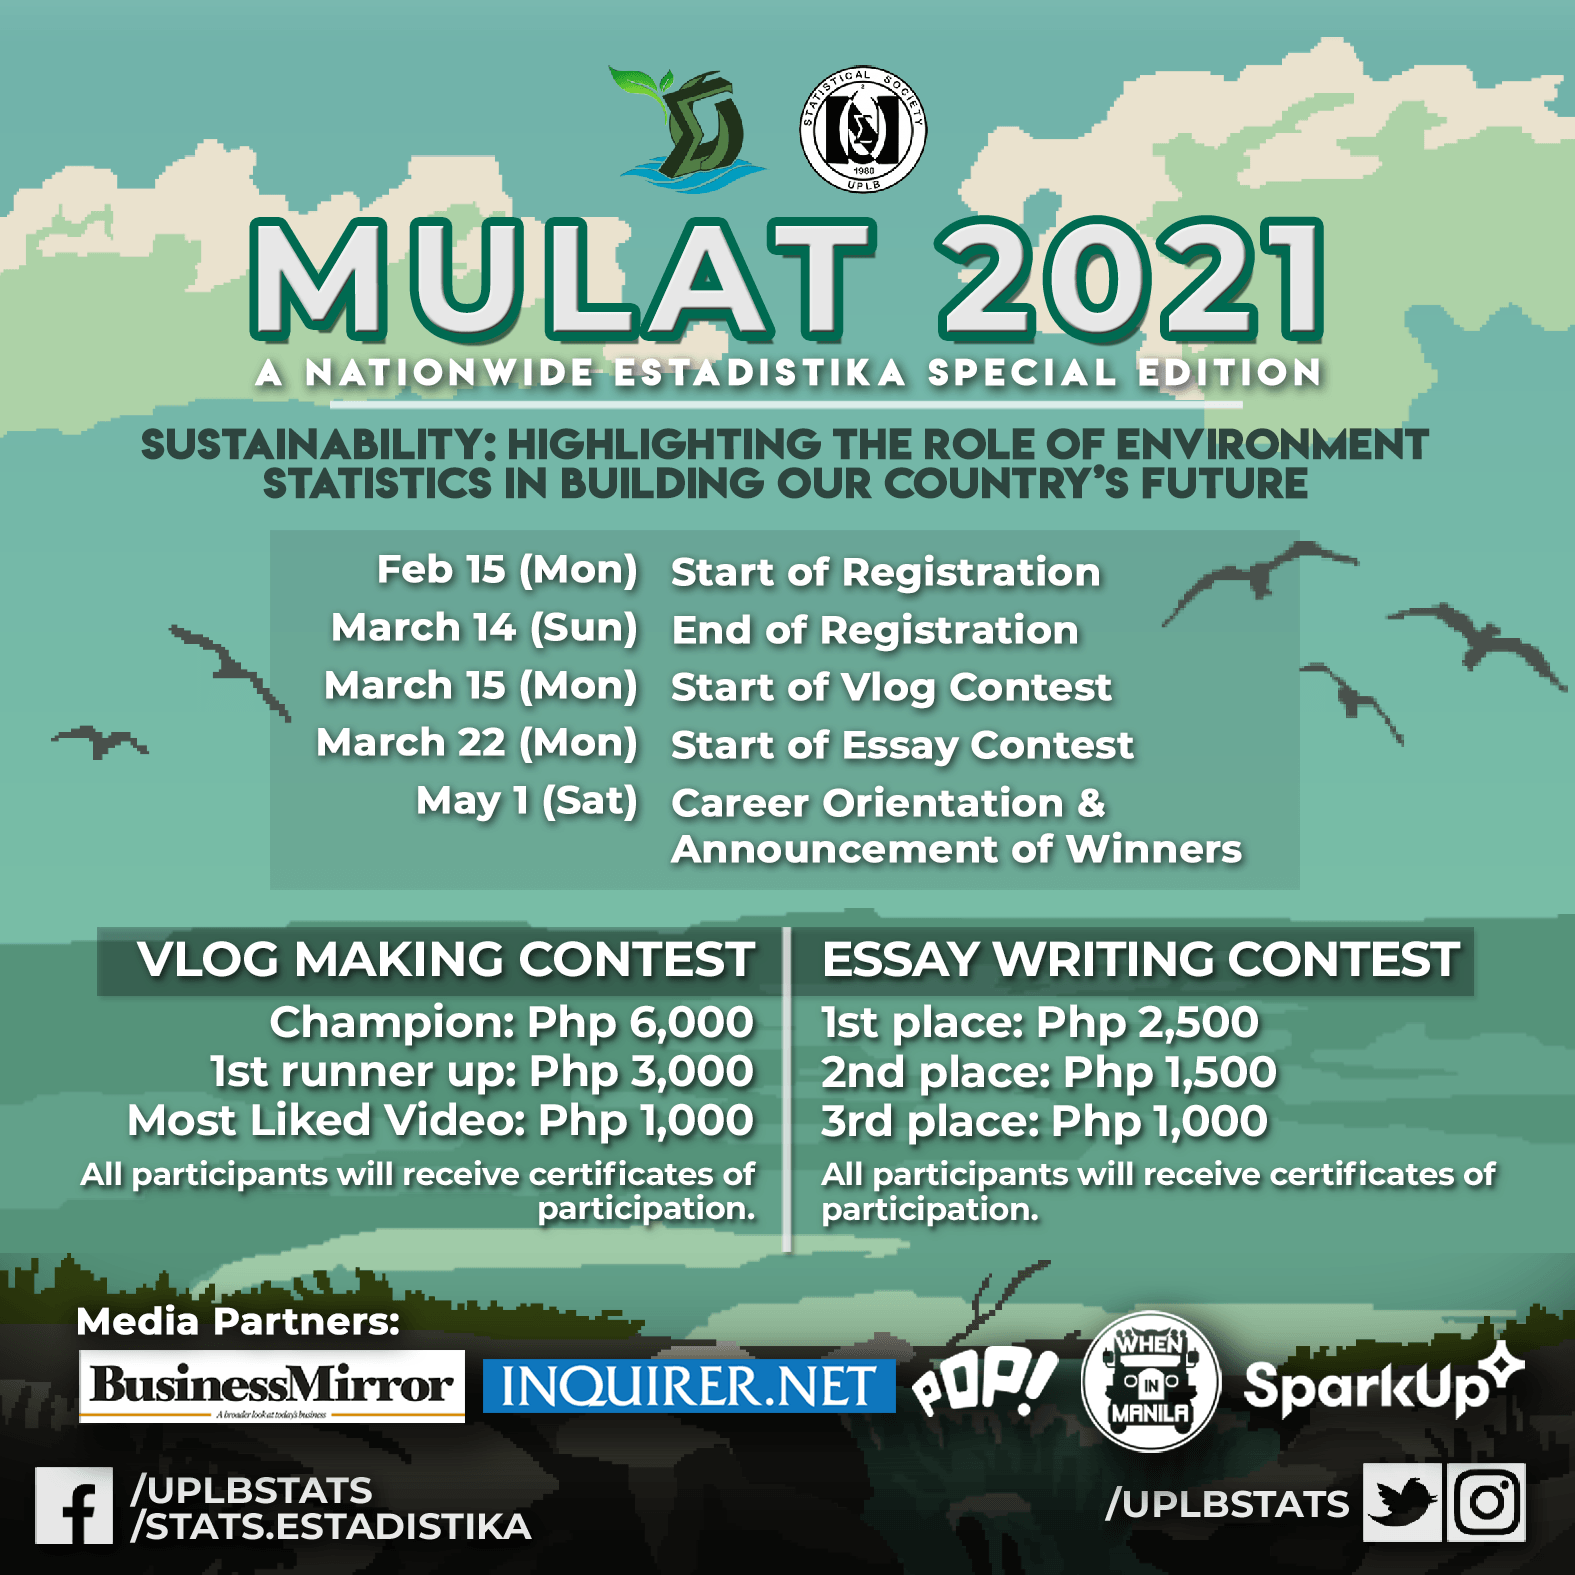 UPLB STATS highlights the importance of environment statistics in Mulat 2021